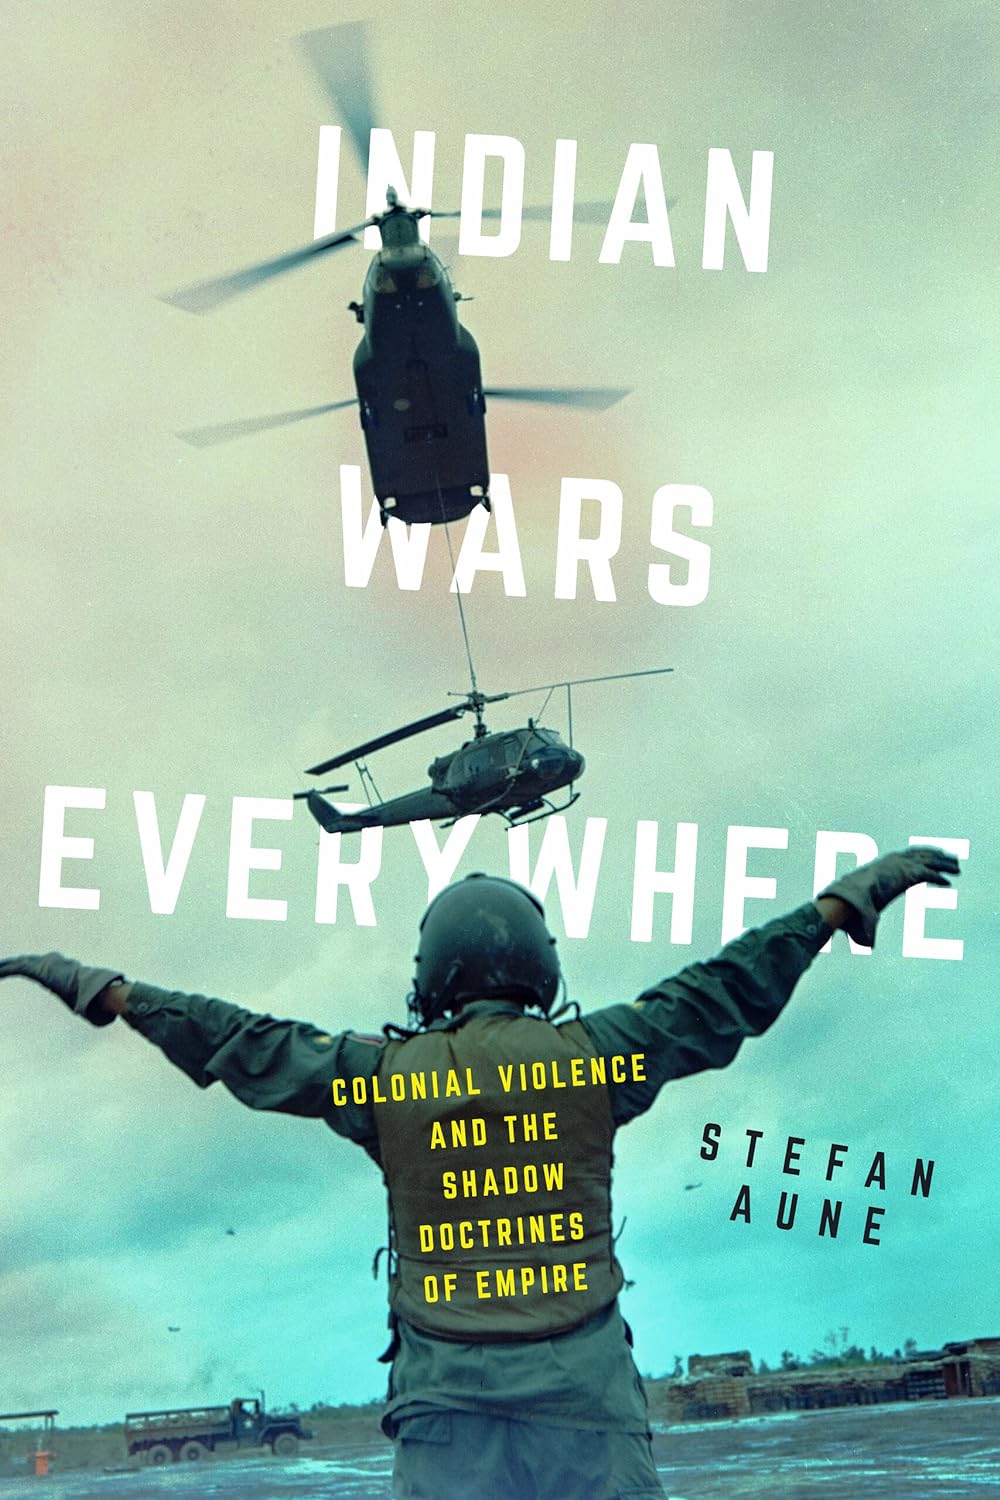 Indian Wars Everywhere: Colonial Violence and the Shadow Doctrines of empire by Stefan Aune